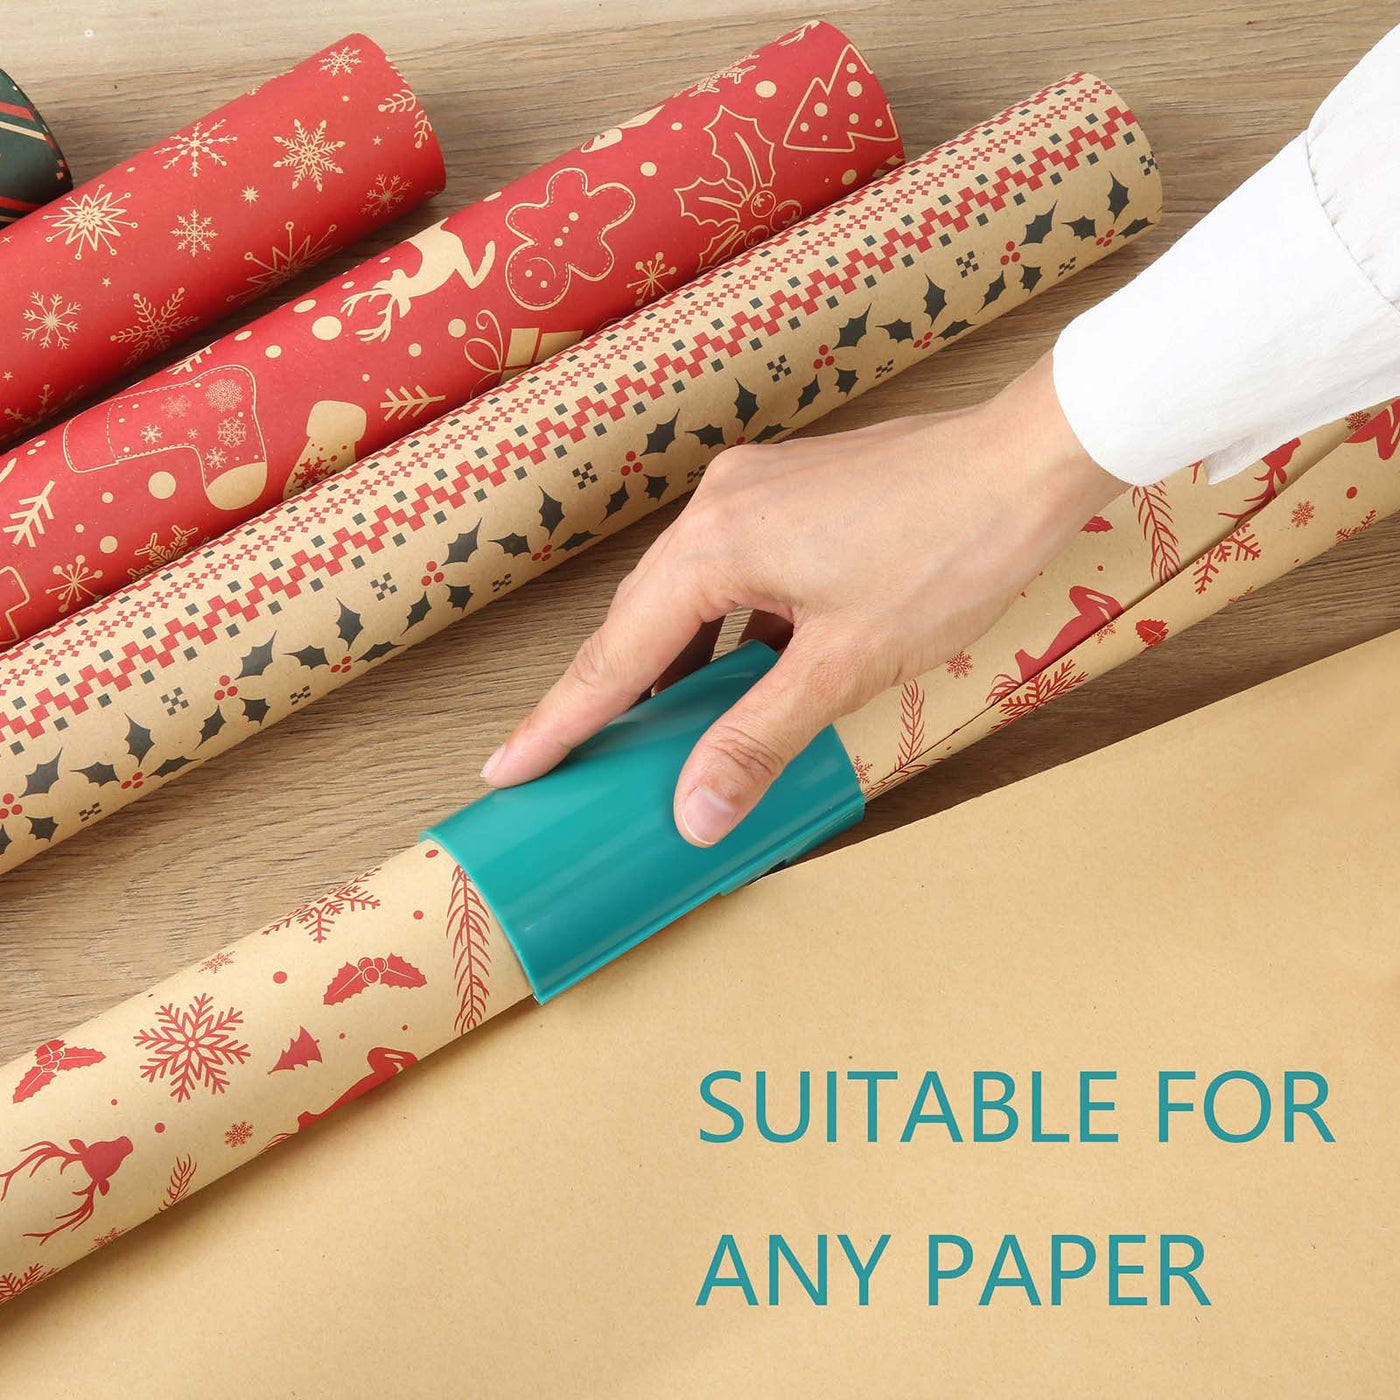 Christmas Wrapping with Stainless Steel Blade, Gift Wrapping, Holiday Paper Cutter, Green, Cutting Tool, 1 Pack